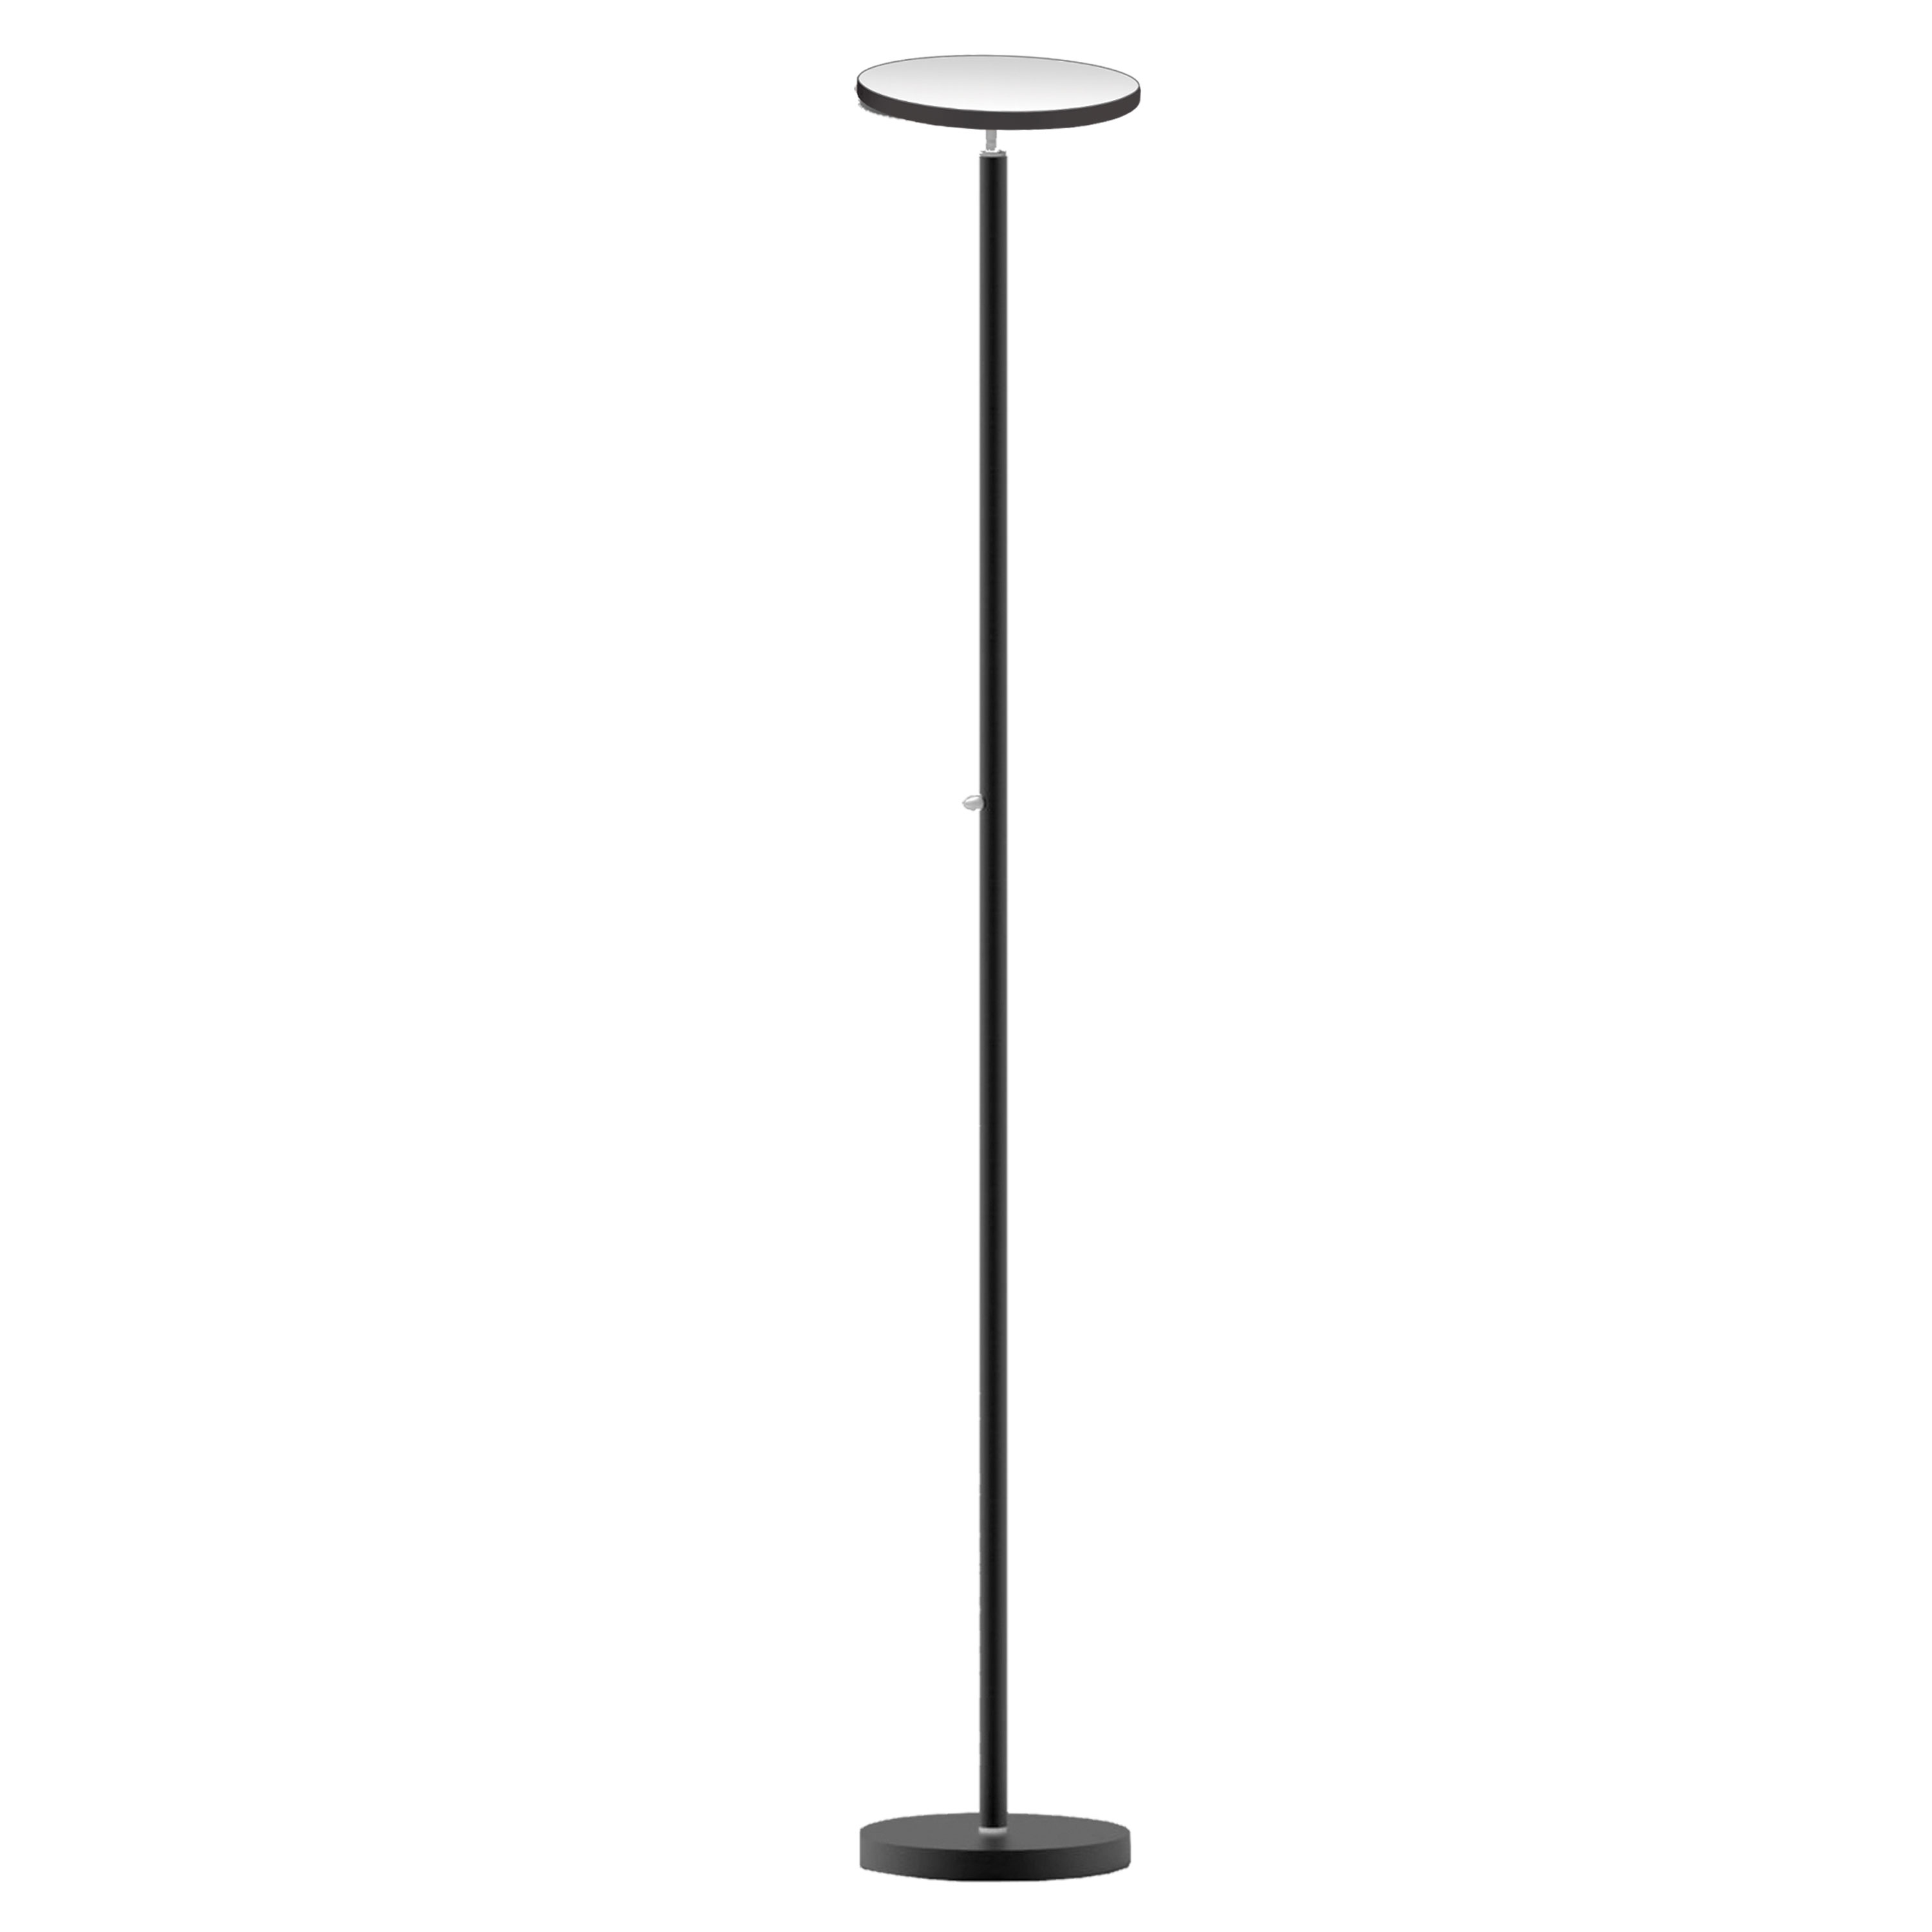 Adding welcome light in a smooth contemporary aesthetic, the LED Floor Lamp collection features a distinctive profile. The design features an integrated LED light. LED fixtures produce light at up to 90 percent better efficiency than incandescent lighting. The metal base and rod curves back slightly for the simple configuration, splitting into two arms for the mother/son light. The light housing directs illumination down from above, making it ideal for reading, studying or work. Available in both a simple and mother/son configuration, it's a stylish and practical solution to any dark corners of your home or office.